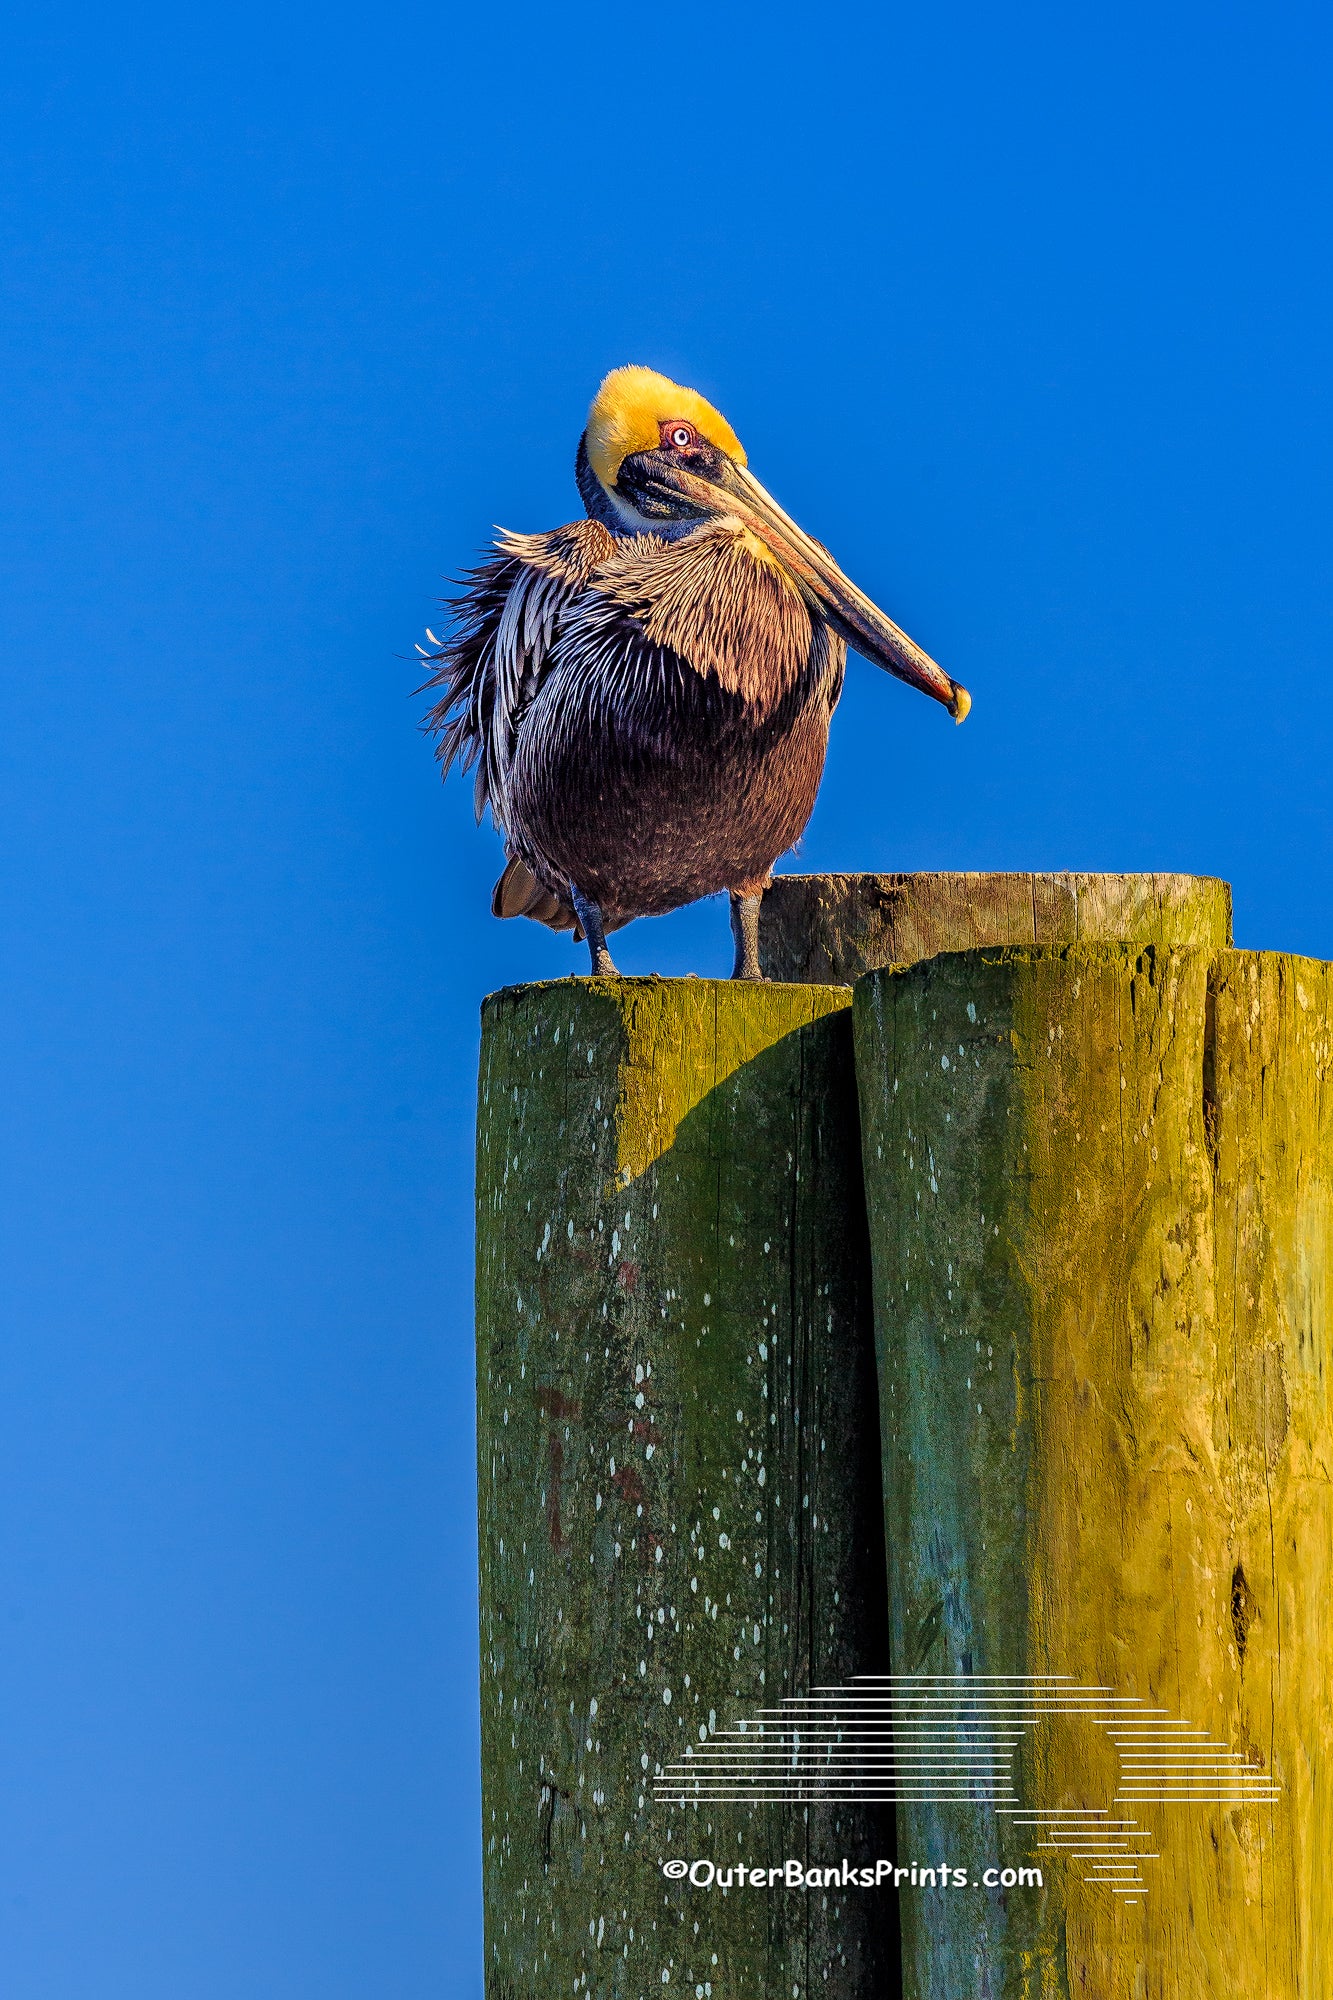 A Brown pelican in its winter breeding plumage. As summer comes the brown pelicans head becomes a deep brown color. Photographed in Wanchese North Carolina on the Outer Banks.